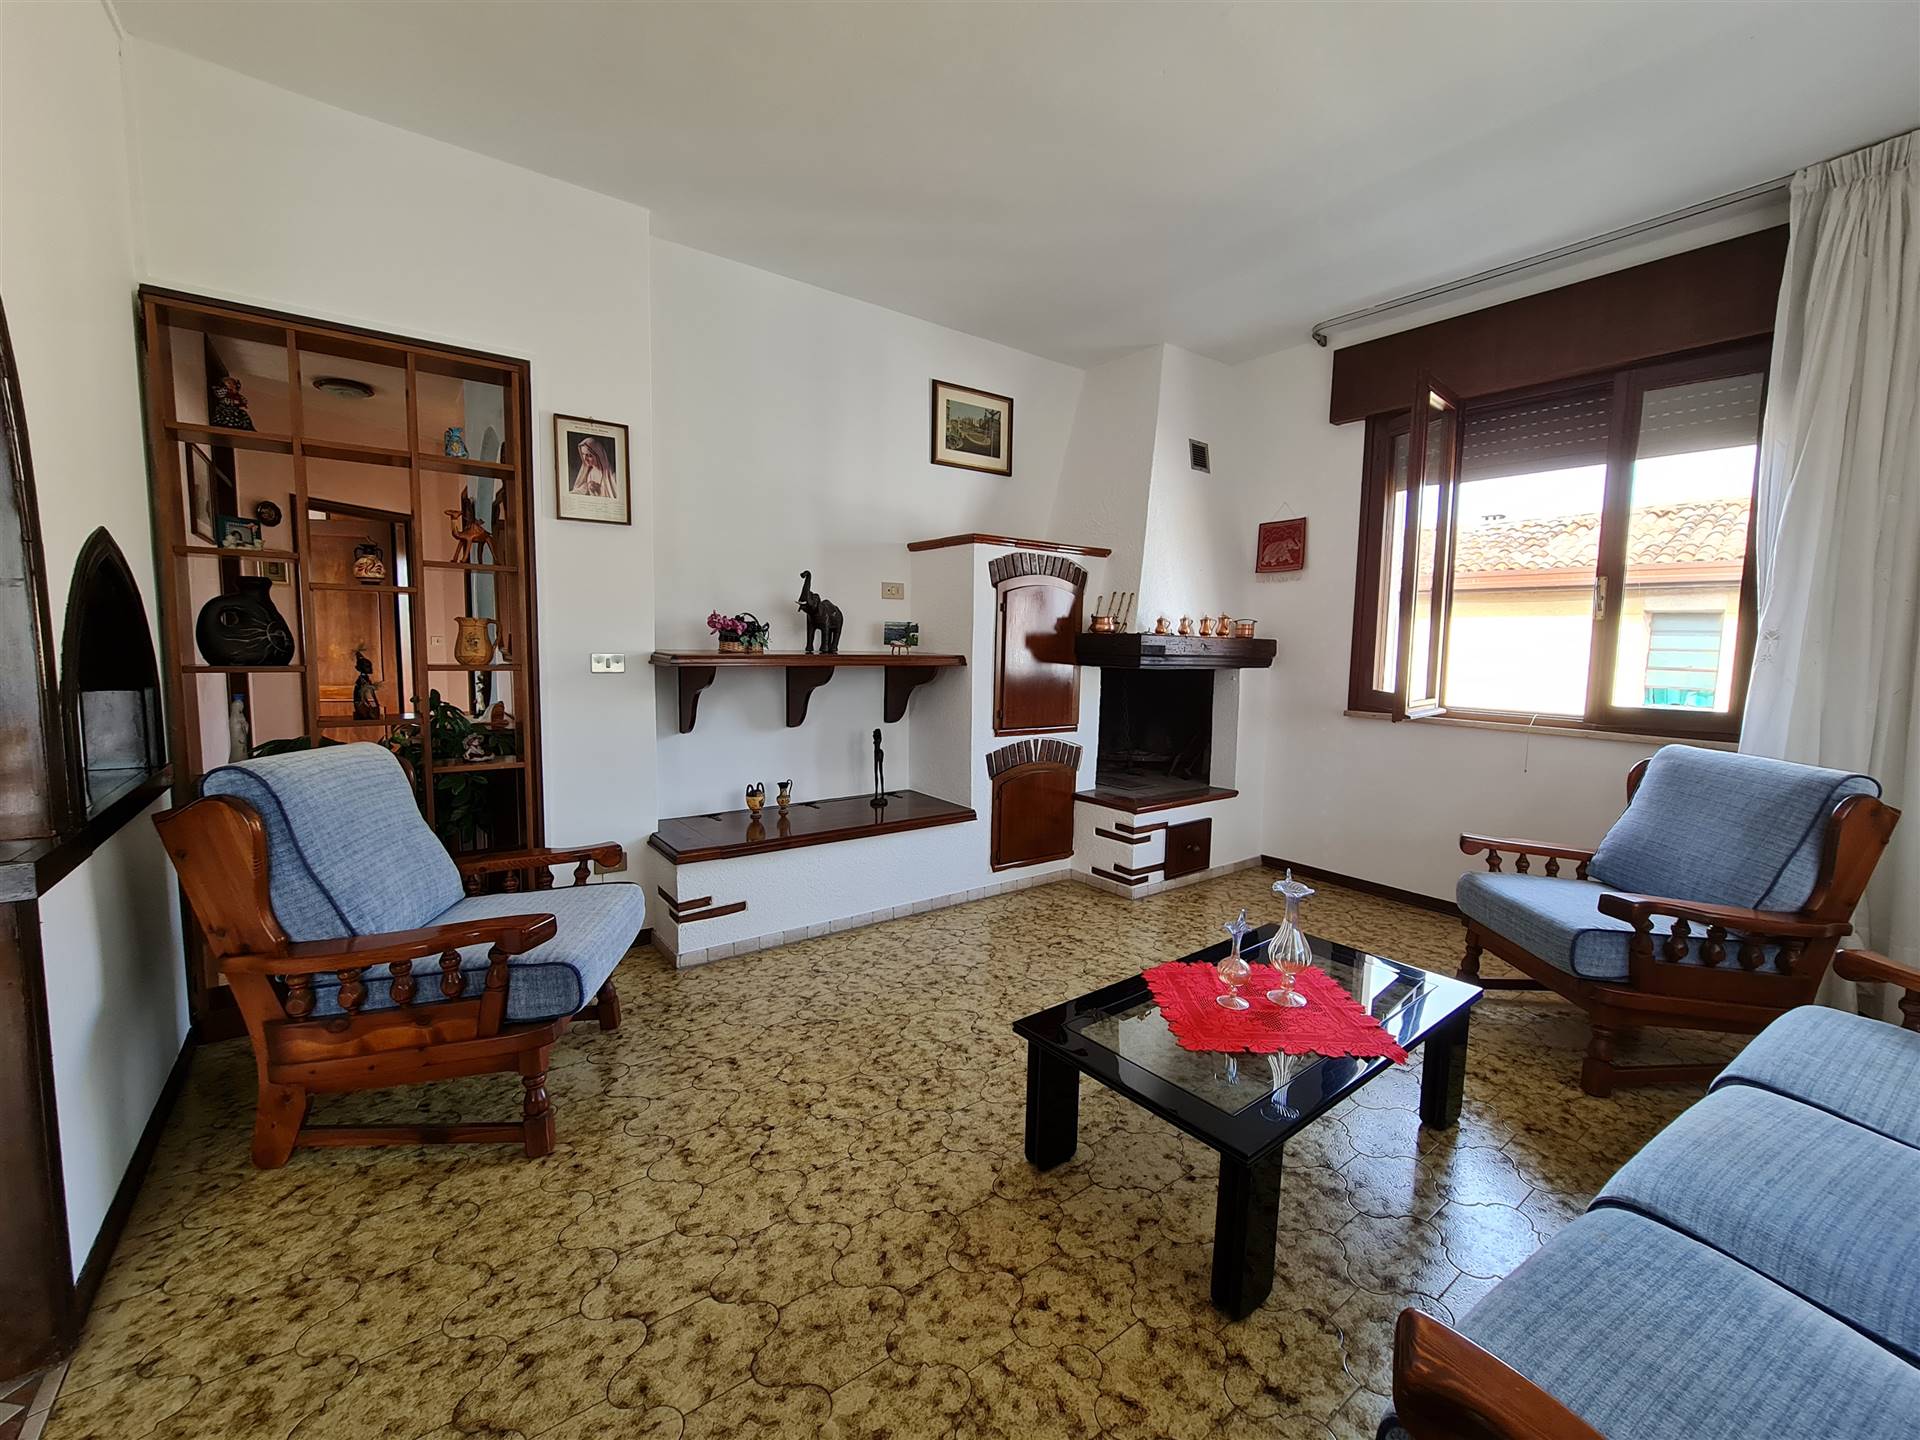 PADERNELLO, PAESE, Apartment for sale of 100 Sq. mt., Habitable, Heating Individual heating system, Energetic class: G, placed at 1° on 1, composed 